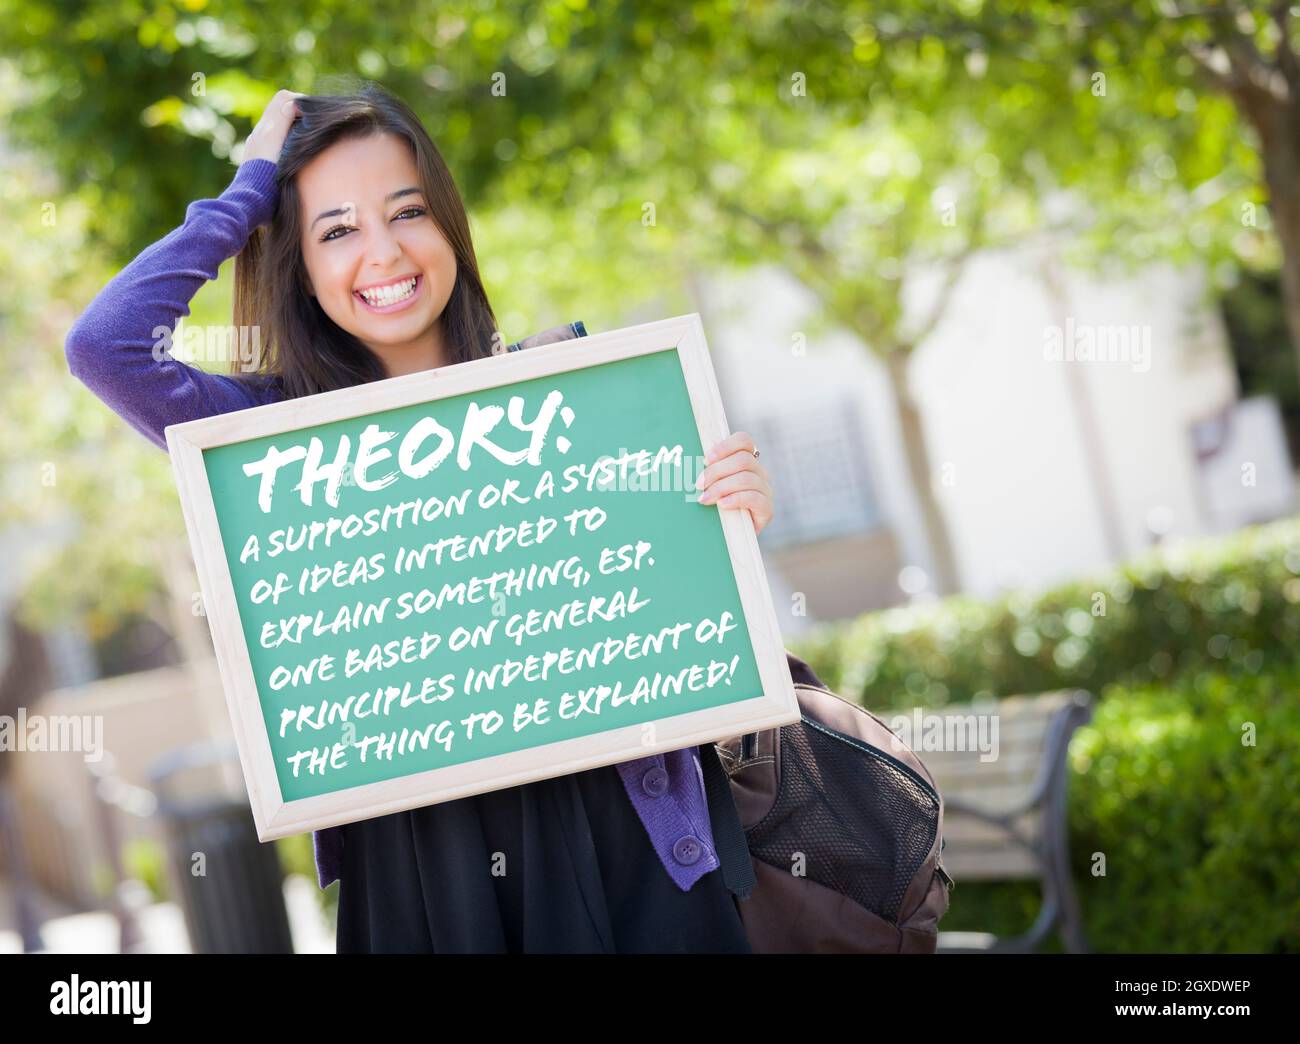 Excited Mixed Race Female Student Holding Chalkboard With Theory and the Definition Written on it. Stock Photo